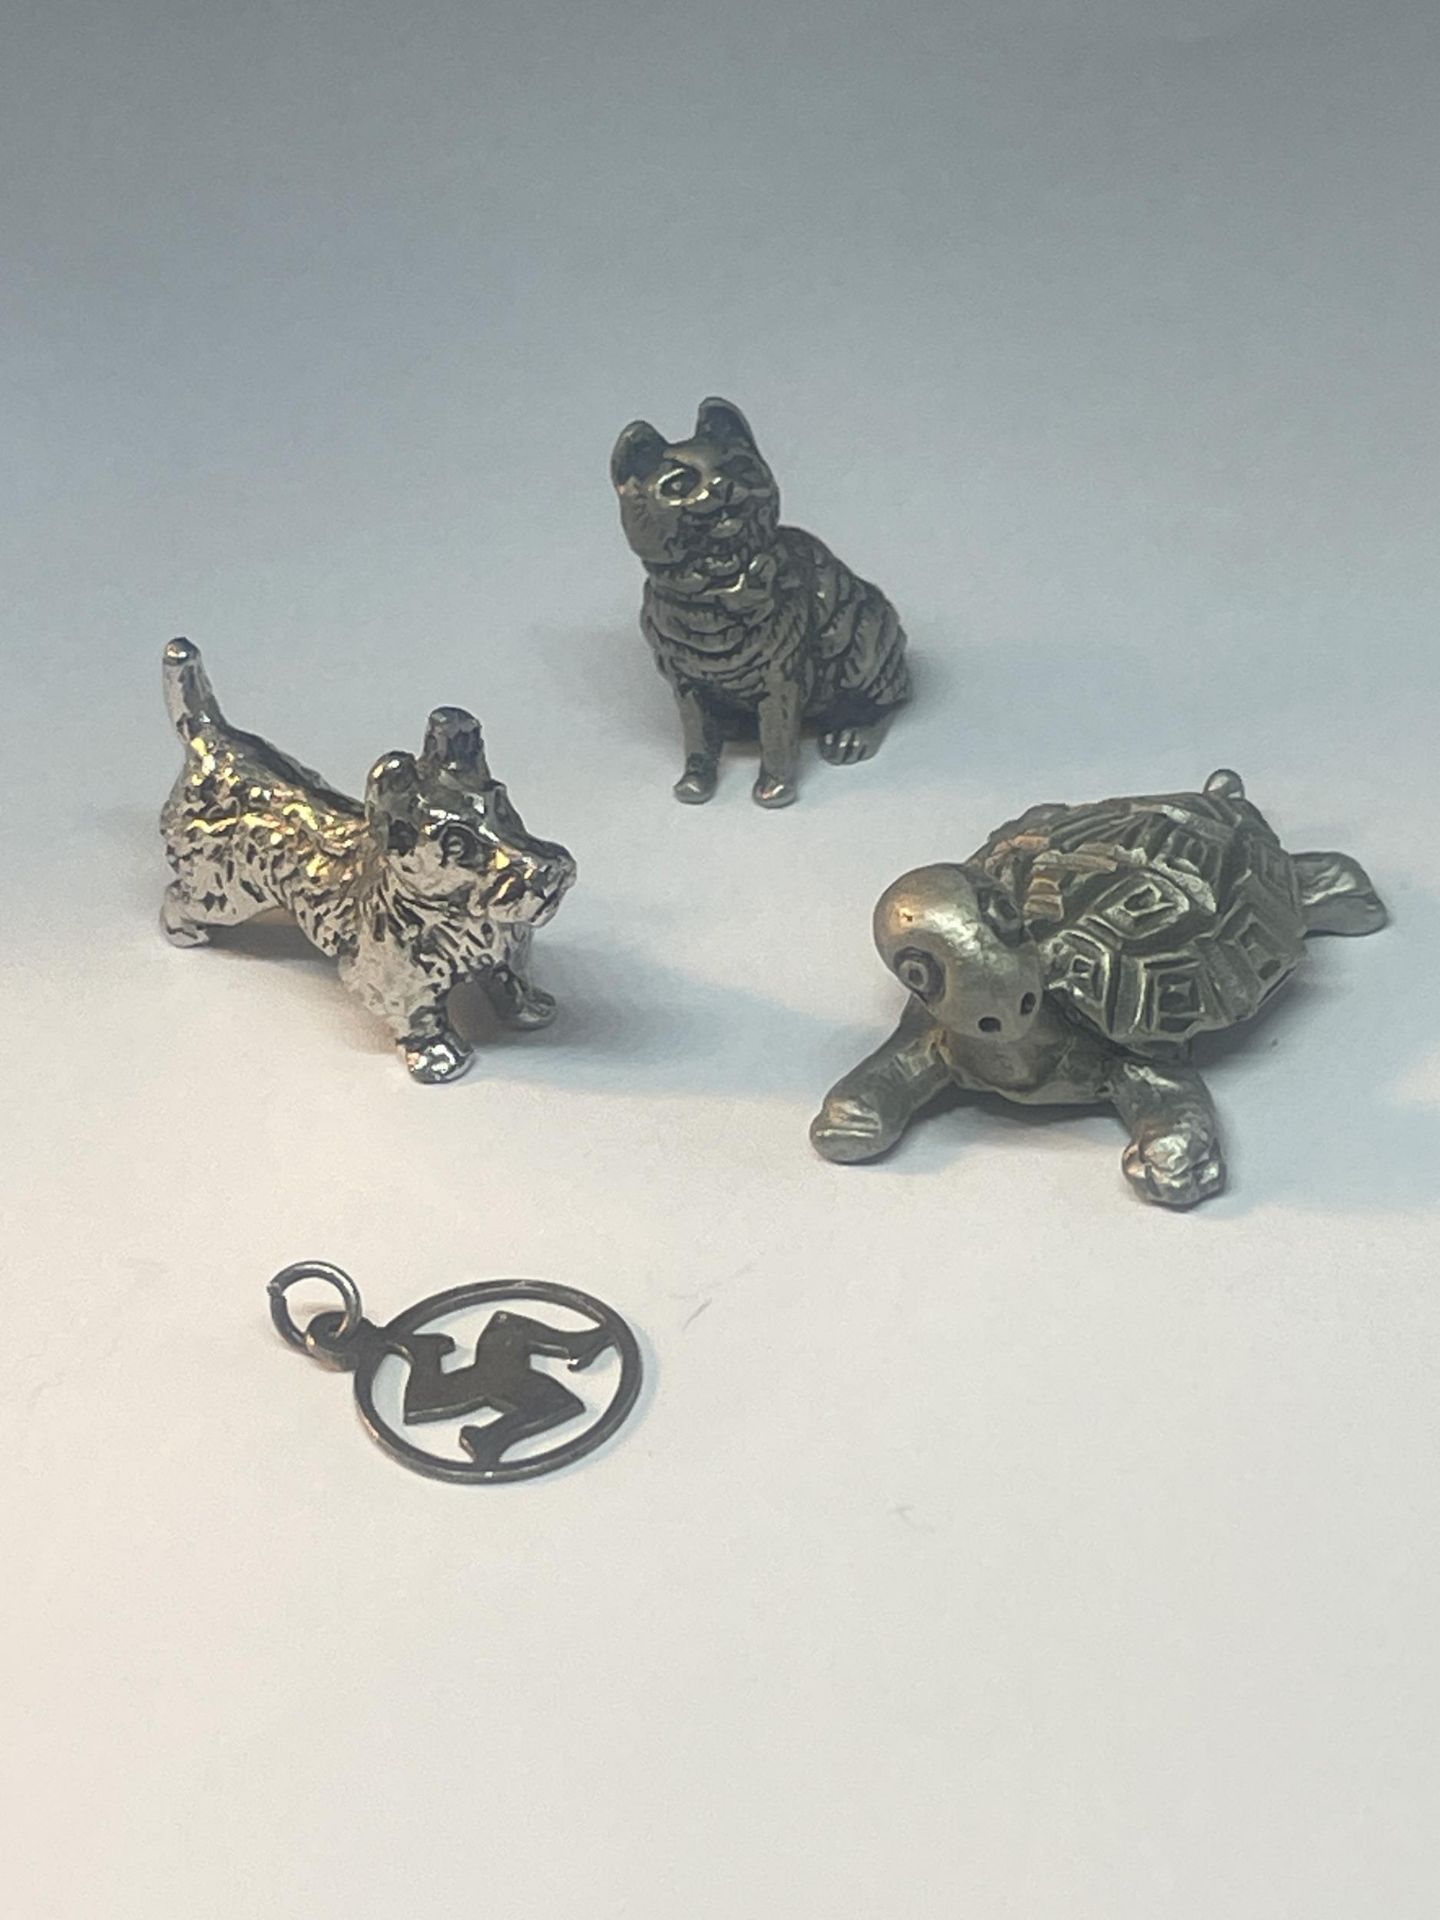 FOUR ITEMS TO INCLUDE A MINIATURE PEWTER TORTOISE, TWO WHITE METAL FIGURES - A DOG AND A CAT AND A